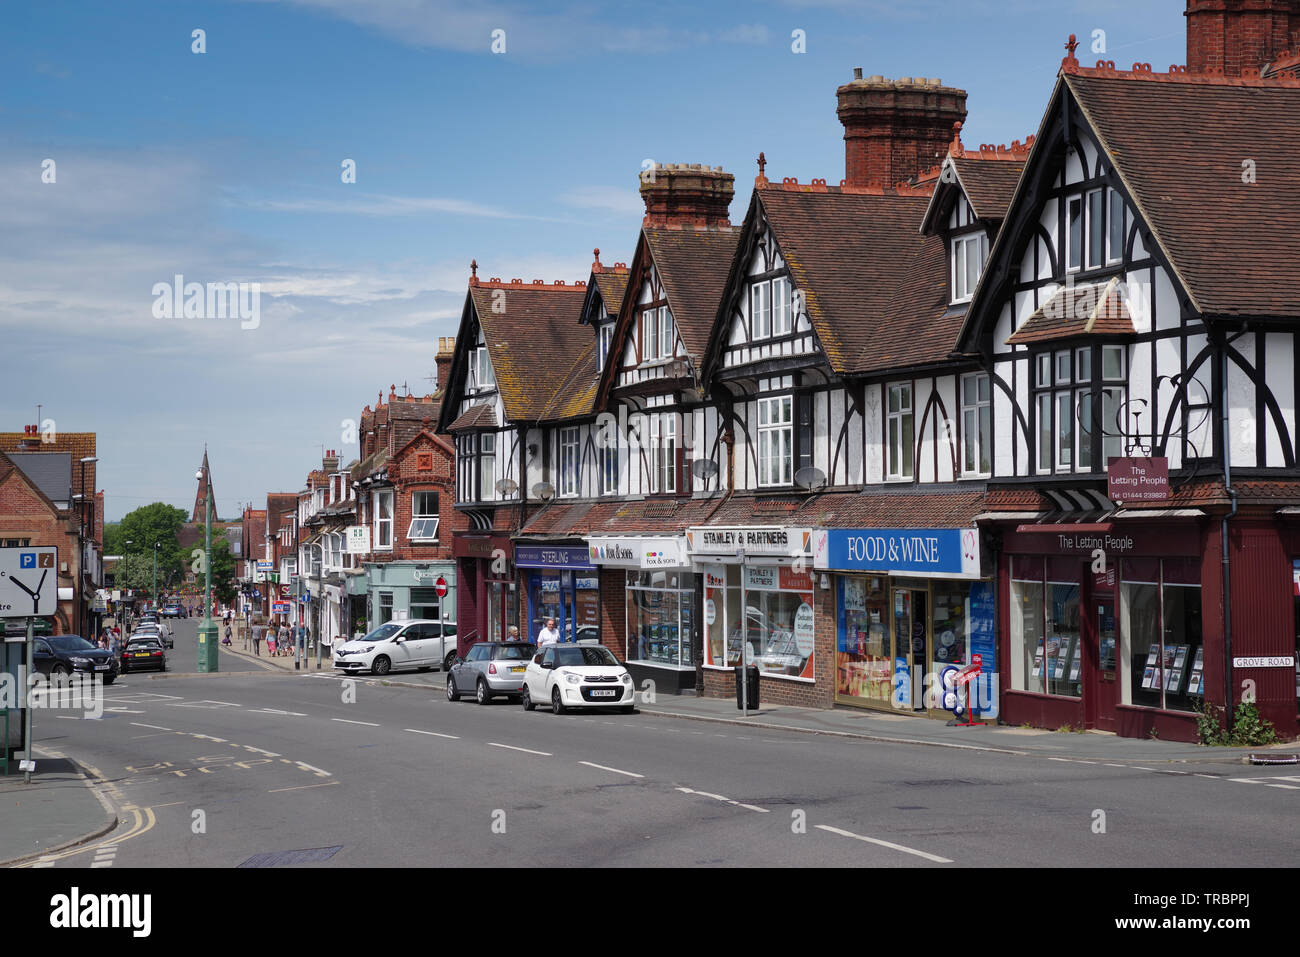 Burgess Hill high street on a bright, sunny day - West Sussex, UK Stock Photo